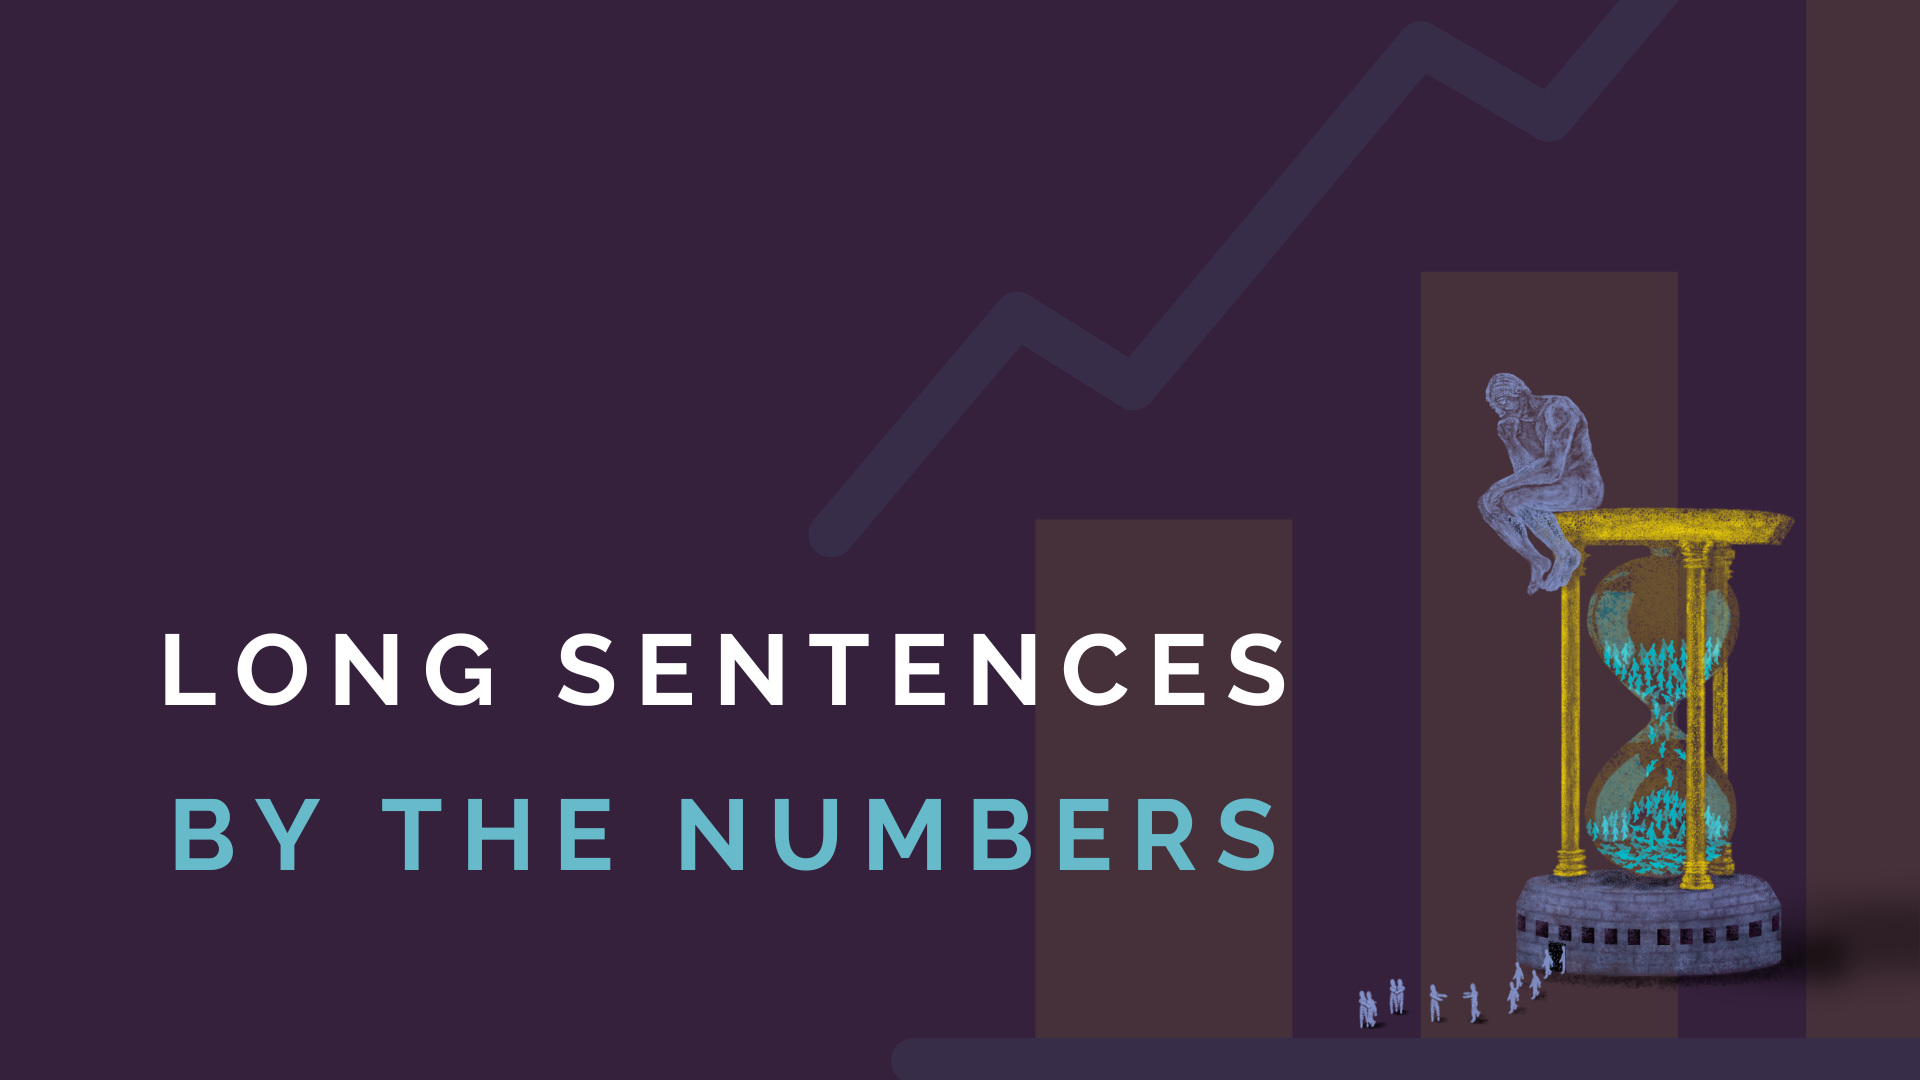 LONG SENTENCES BY THE NUMBERS